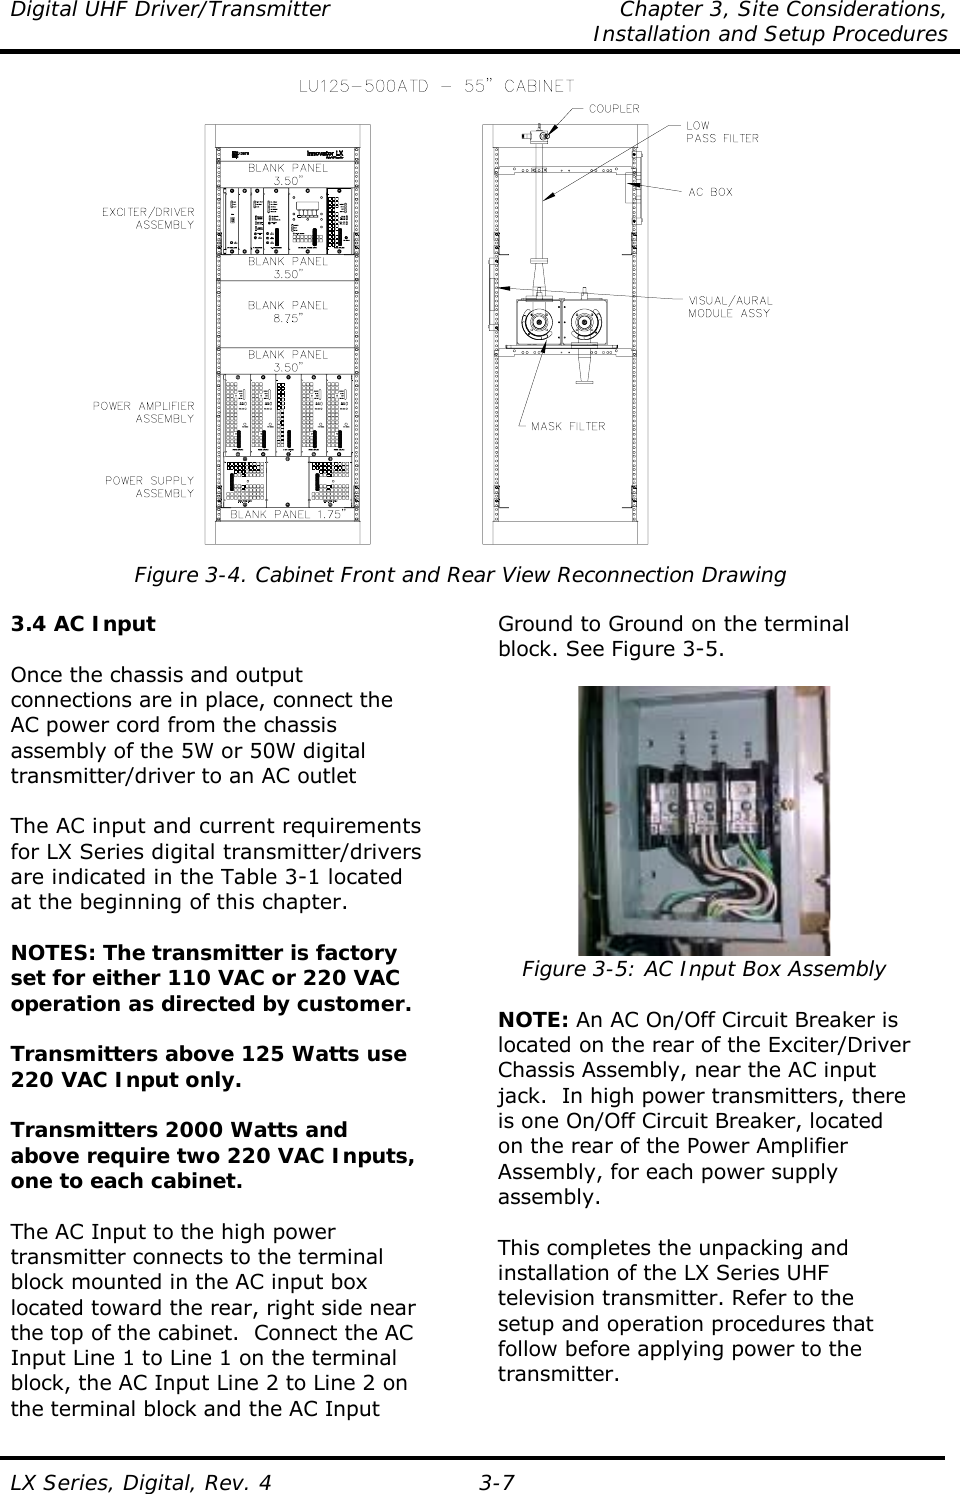 Digital UHF Driver/Transmitter  Chapter 3, Site Considerations,    Installation and Setup Procedures  LX Series, Digital, Rev. 4 3-7  Figure 3-4. Cabinet Front and Rear View Reconnection Drawing  3.4 AC Input  Once the chassis and output connections are in place, connect the AC power cord from the chassis assembly of the 5W or 50W digital transmitter/driver to an AC outlet  The AC input and current requirements for LX Series digital transmitter/drivers are indicated in the Table 3-1 located at the beginning of this chapter.  NOTES: The transmitter is factory set for either 110 VAC or 220 VAC operation as directed by customer.  Transmitters above 125 Watts use 220 VAC Input only.  Transmitters 2000 Watts and above require two 220 VAC Inputs, one to each cabinet.  The AC Input to the high power transmitter connects to the terminal block mounted in the AC input box located toward the rear, right side near the top of the cabinet.  Connect the AC Input Line 1 to Line 1 on the terminal block, the AC Input Line 2 to Line 2 on the terminal block and the AC Input Ground to Ground on the terminal block. See Figure 3-5.   Figure 3-5: AC Input Box Assembly  NOTE: An AC On/Off Circuit Breaker is located on the rear of the Exciter/Driver Chassis Assembly, near the AC input jack.  In high power transmitters, there is one On/Off Circuit Breaker, located on the rear of the Power Amplifier Assembly, for each power supply assembly.  This completes the unpacking and installation of the LX Series UHF television transmitter. Refer to the setup and operation procedures that follow before applying power to the transmitter. 